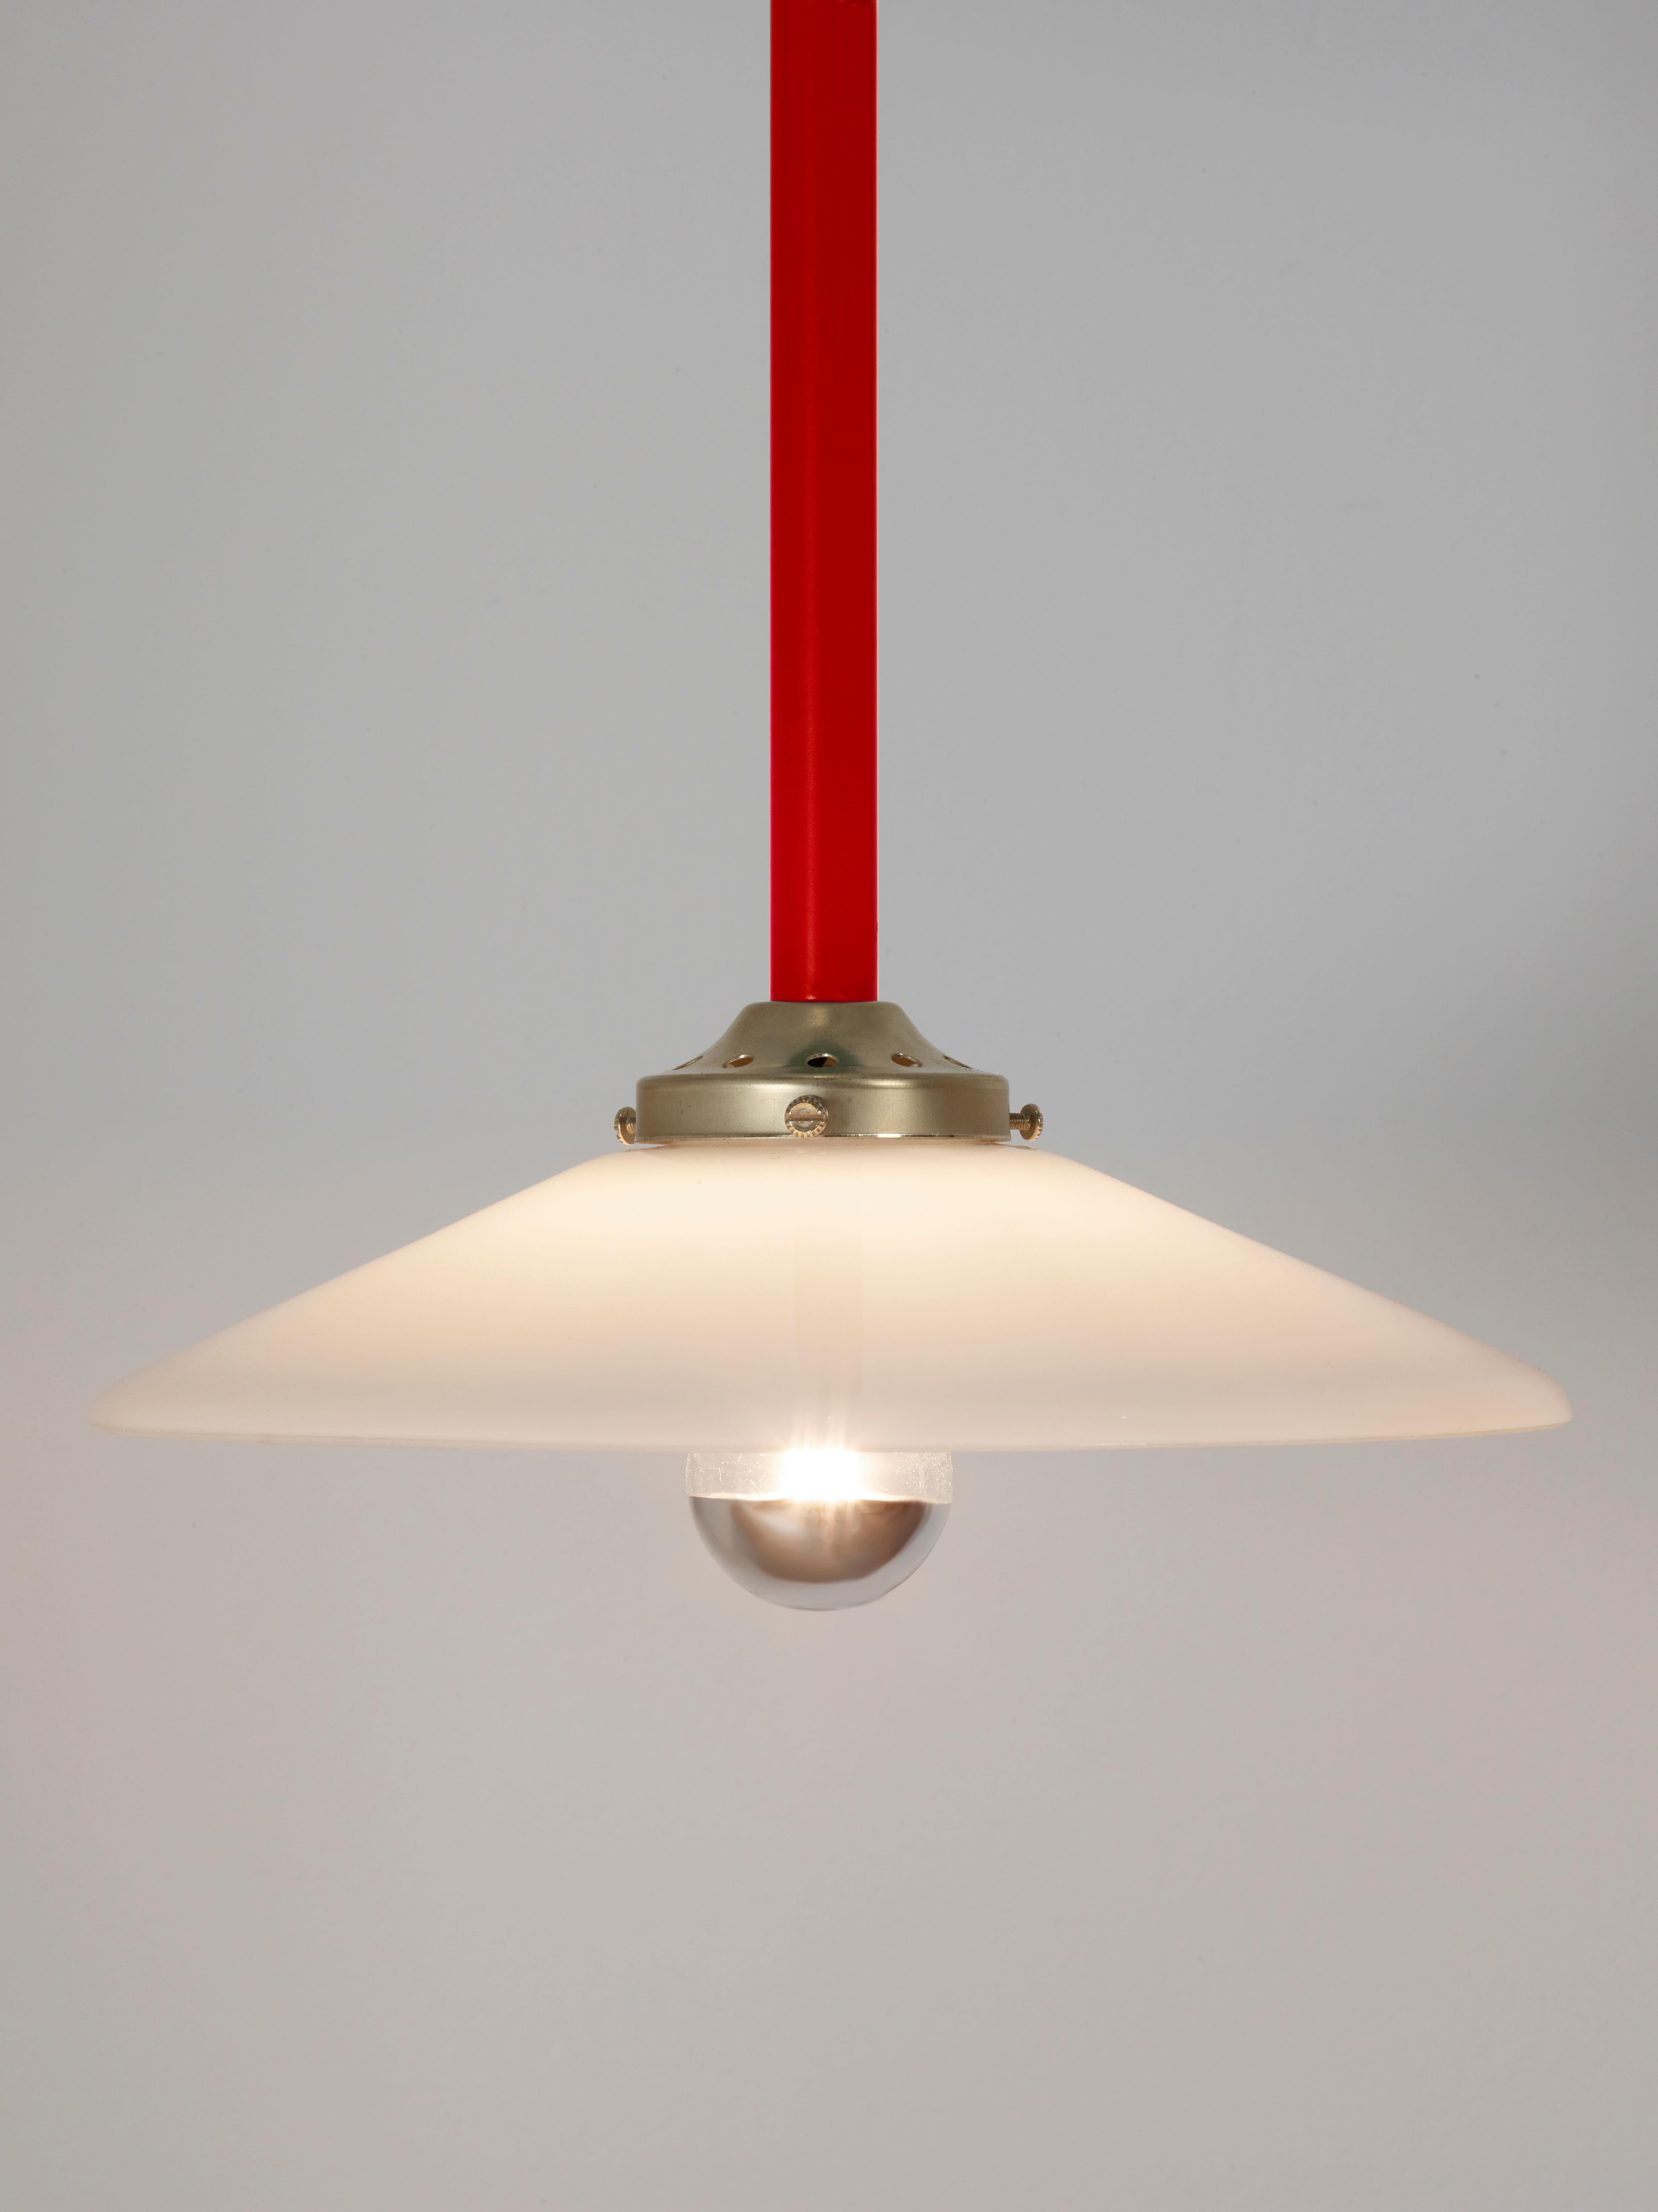 Contemporary Ceiling Lamp N°4 by Muller Van Severen x Valerie Objects, Green For Sale 12